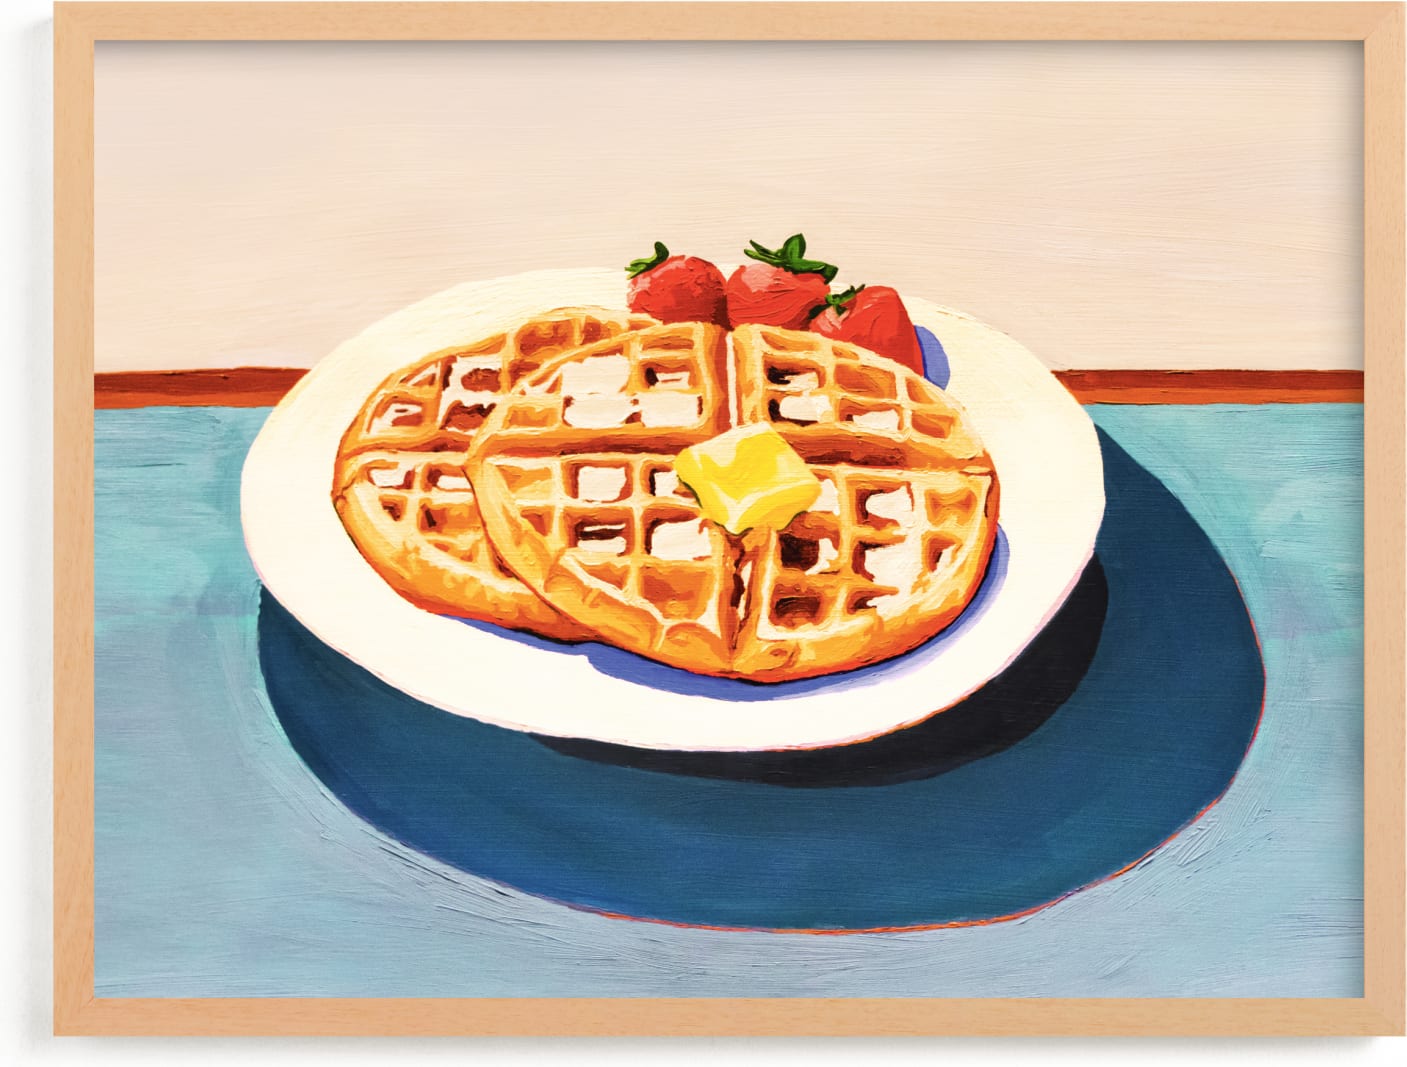 This is a blue art by taylorVdesign called Breakfast at the Diner.